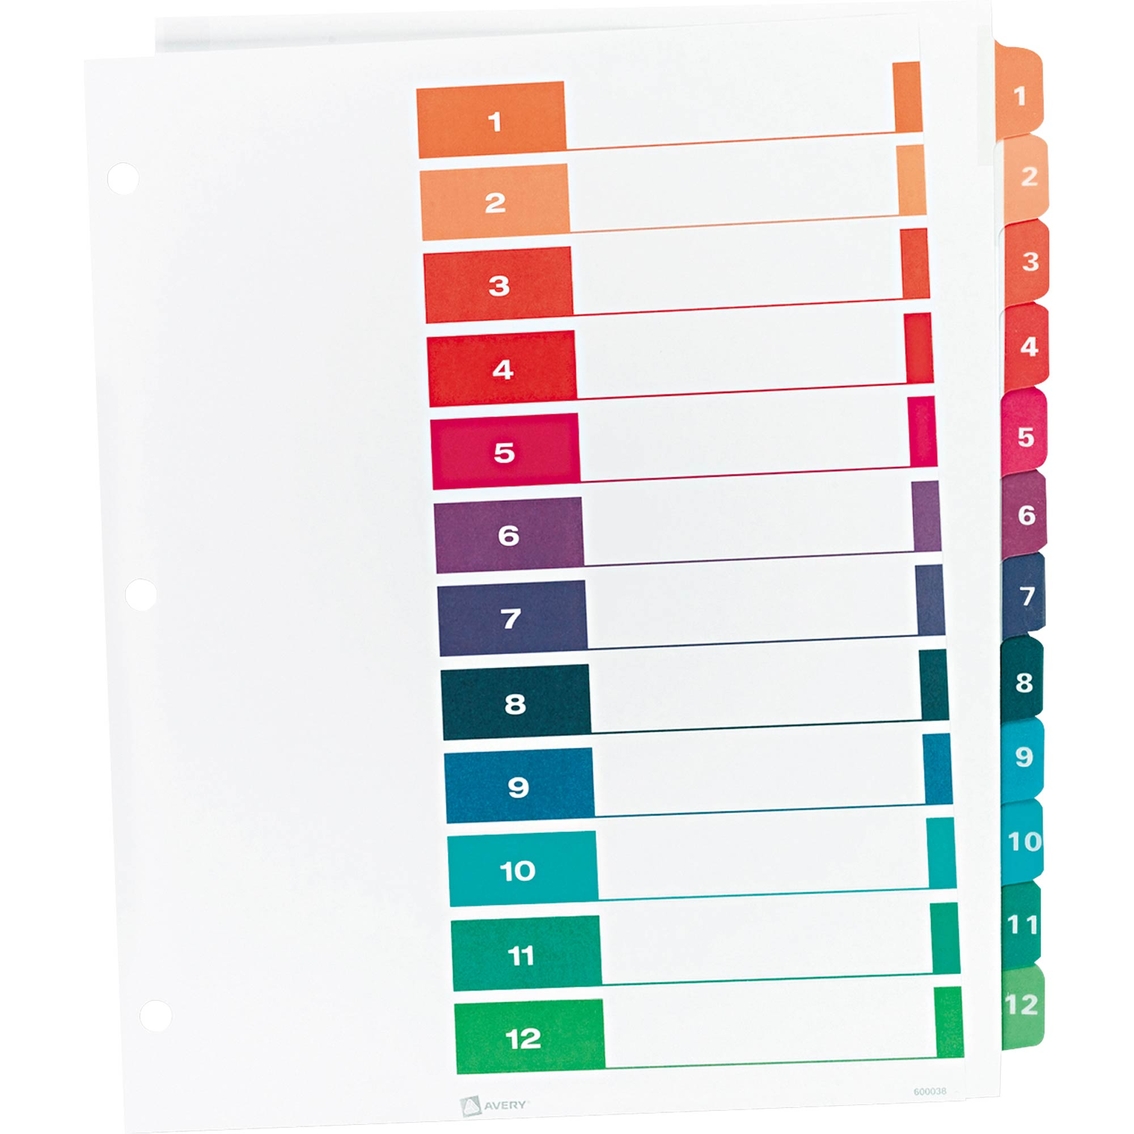 Avery Ready Index Table of Contents Dividers, 12-Tab Set - Image 2 of 3